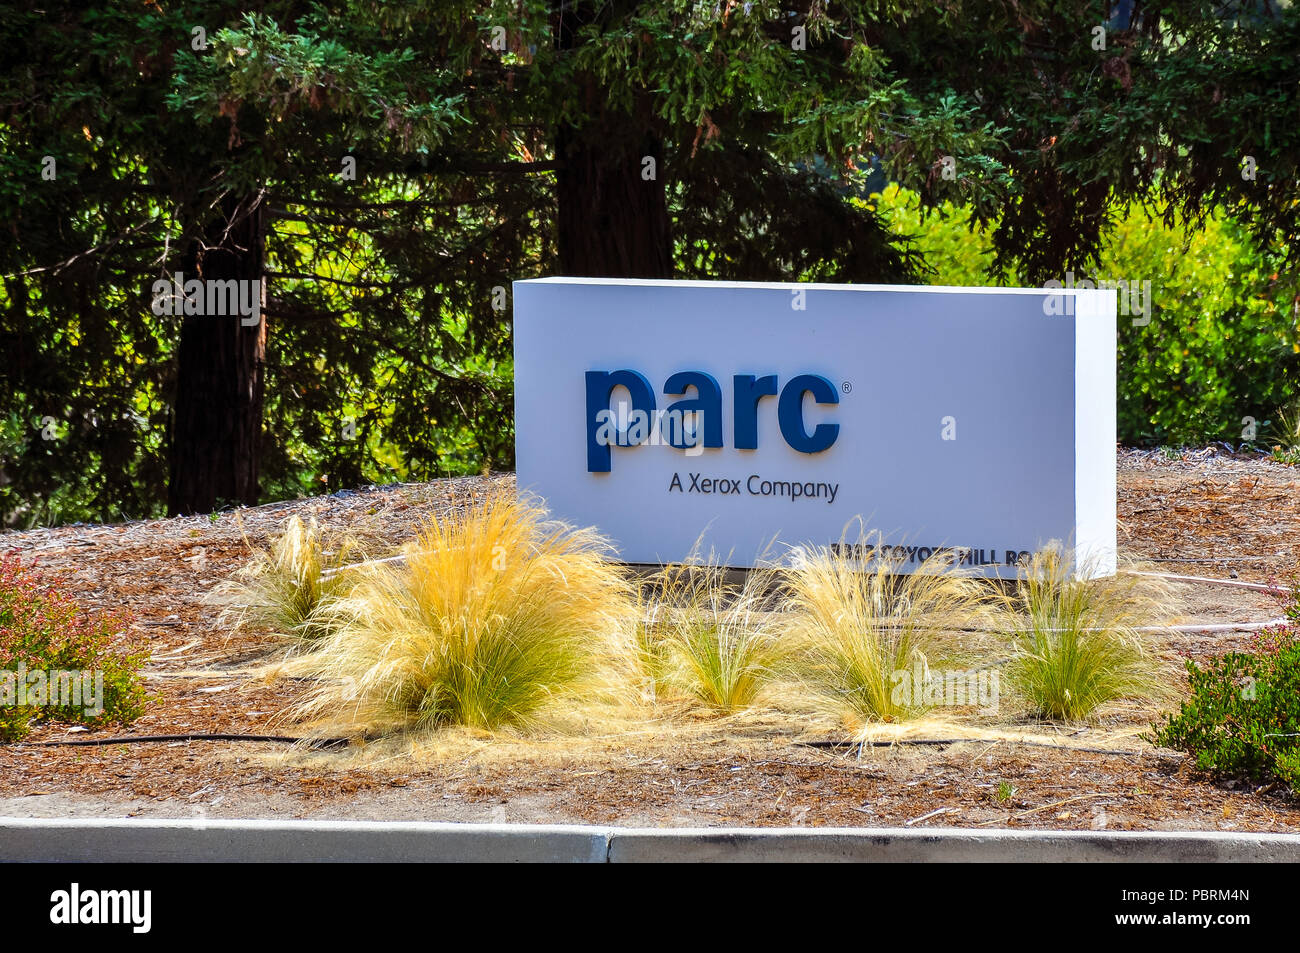 PARC, a Xerox Company. Provides custom R&D services, technology, expertise, and intellectual property to companies, startups, and gov't agencies. Stock Photo